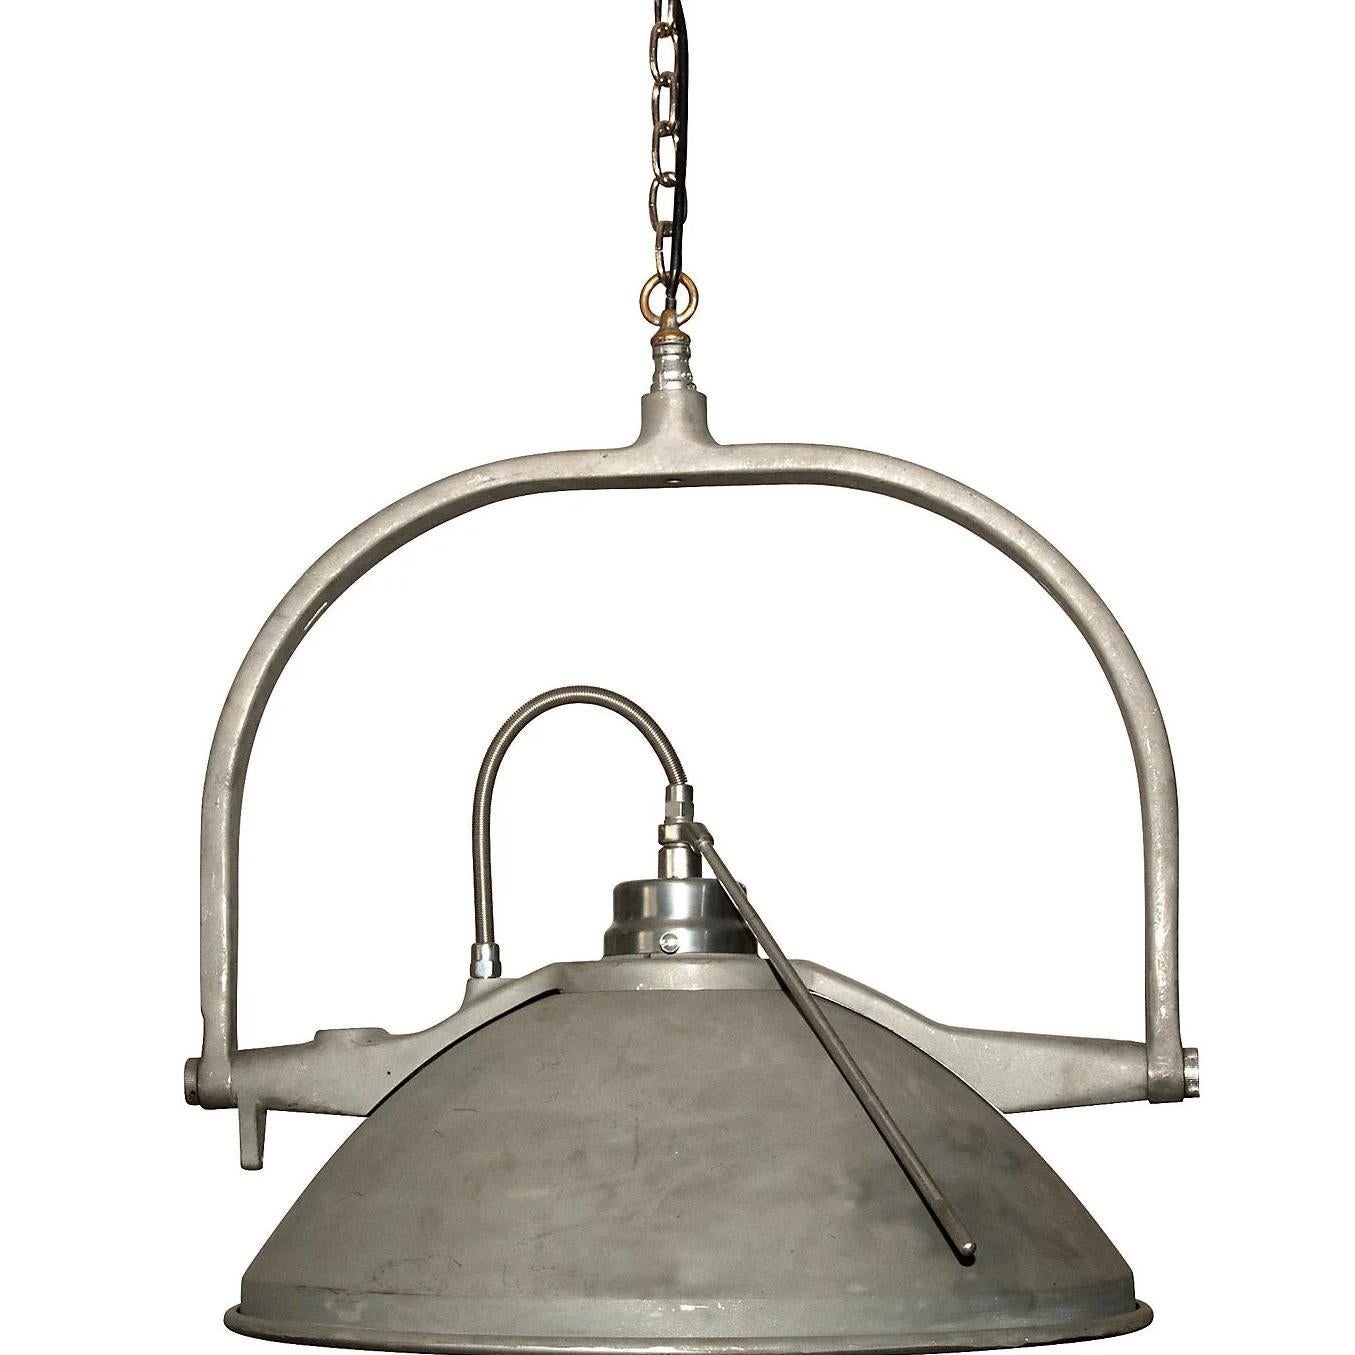 Large hanging lamp that has been repurposed from vintage medical exam lights. They have an adjustable tilt and a mirrored bowl pendant. Suspend a single light over a small dining space or in a gentleman's study. A stunning (and bright) conversation